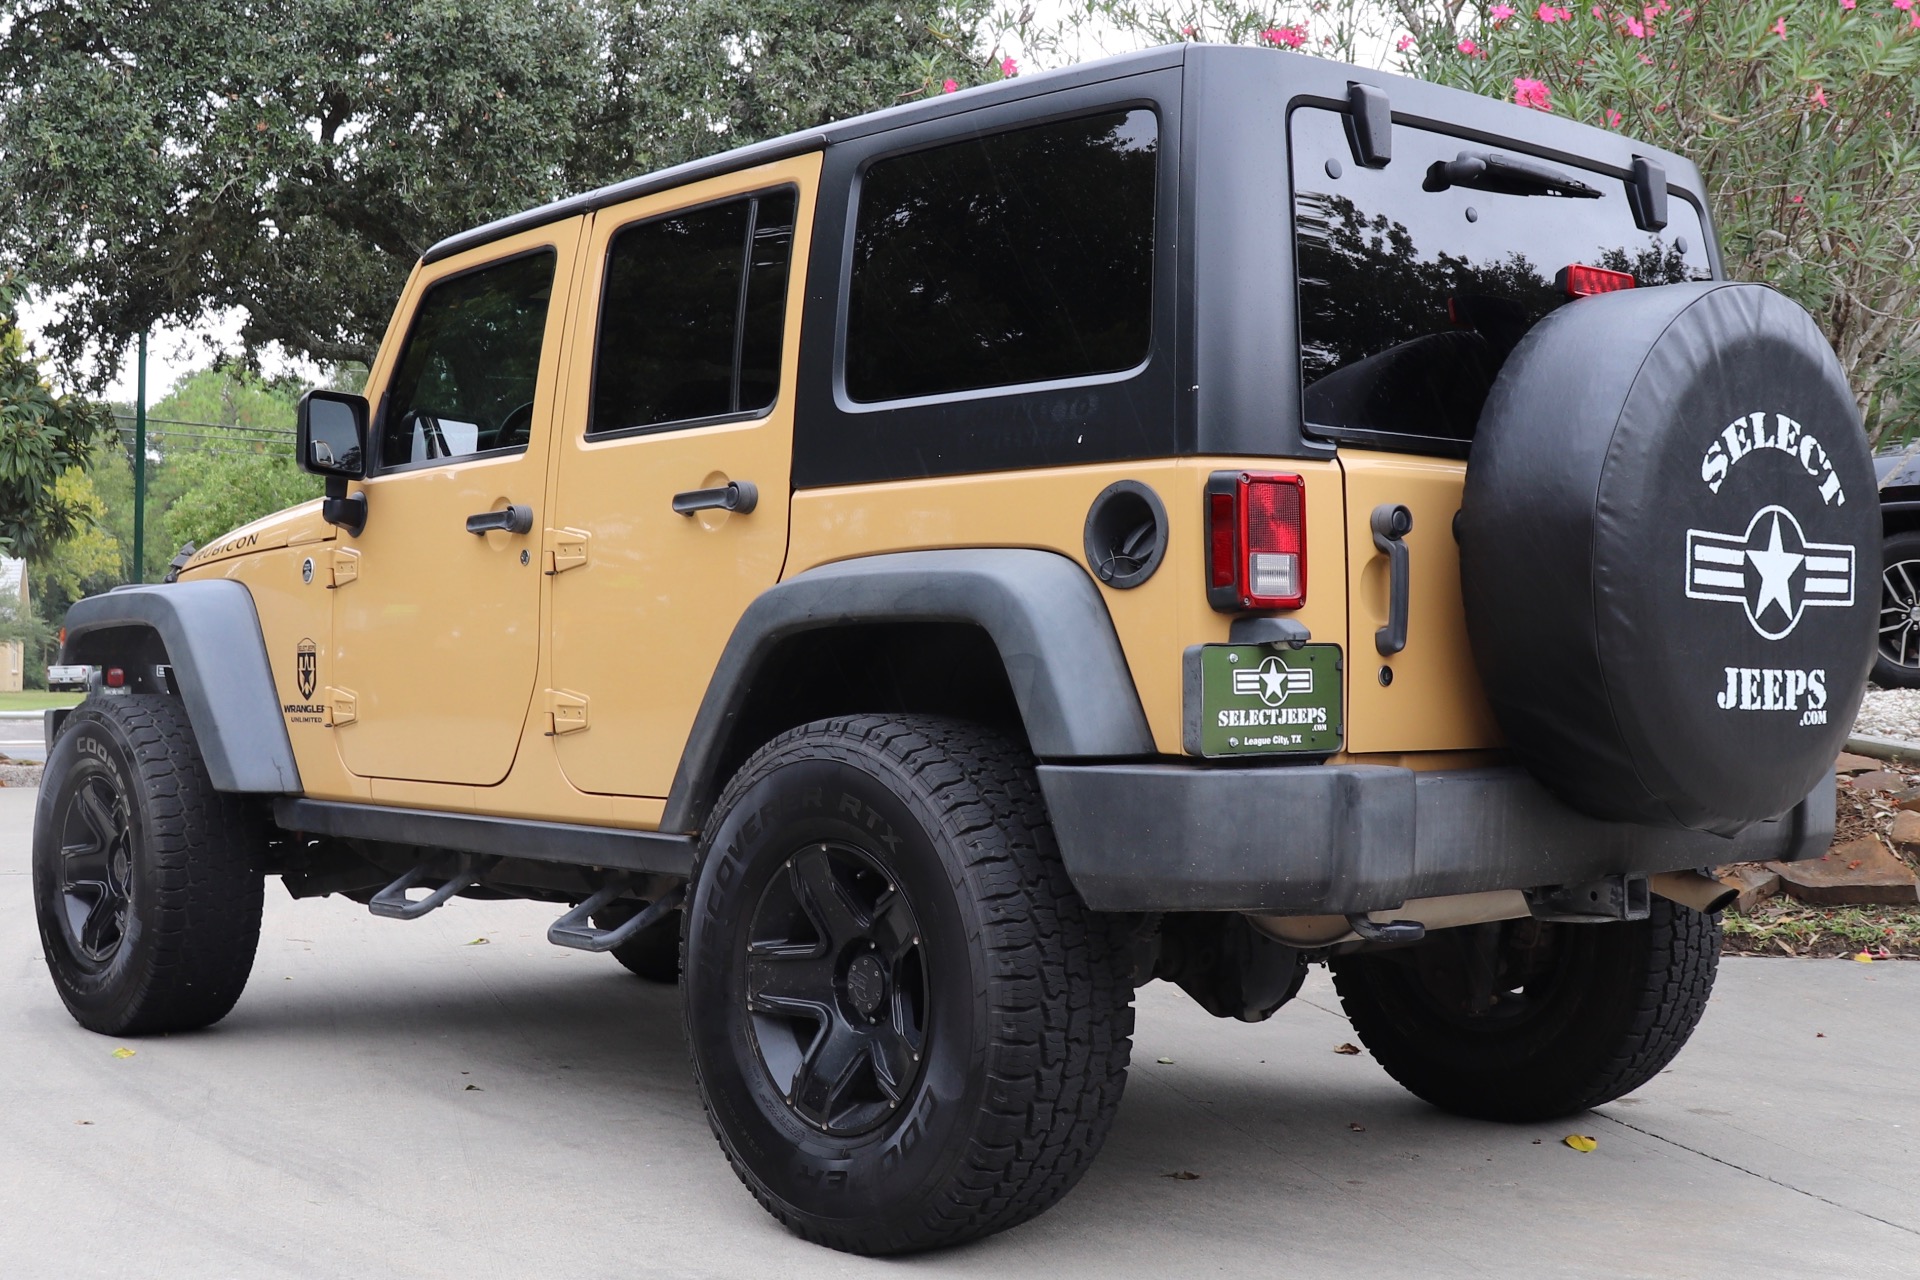 Used 2014 Jeep Rubicon For Sale (23,995) Select Jeeps